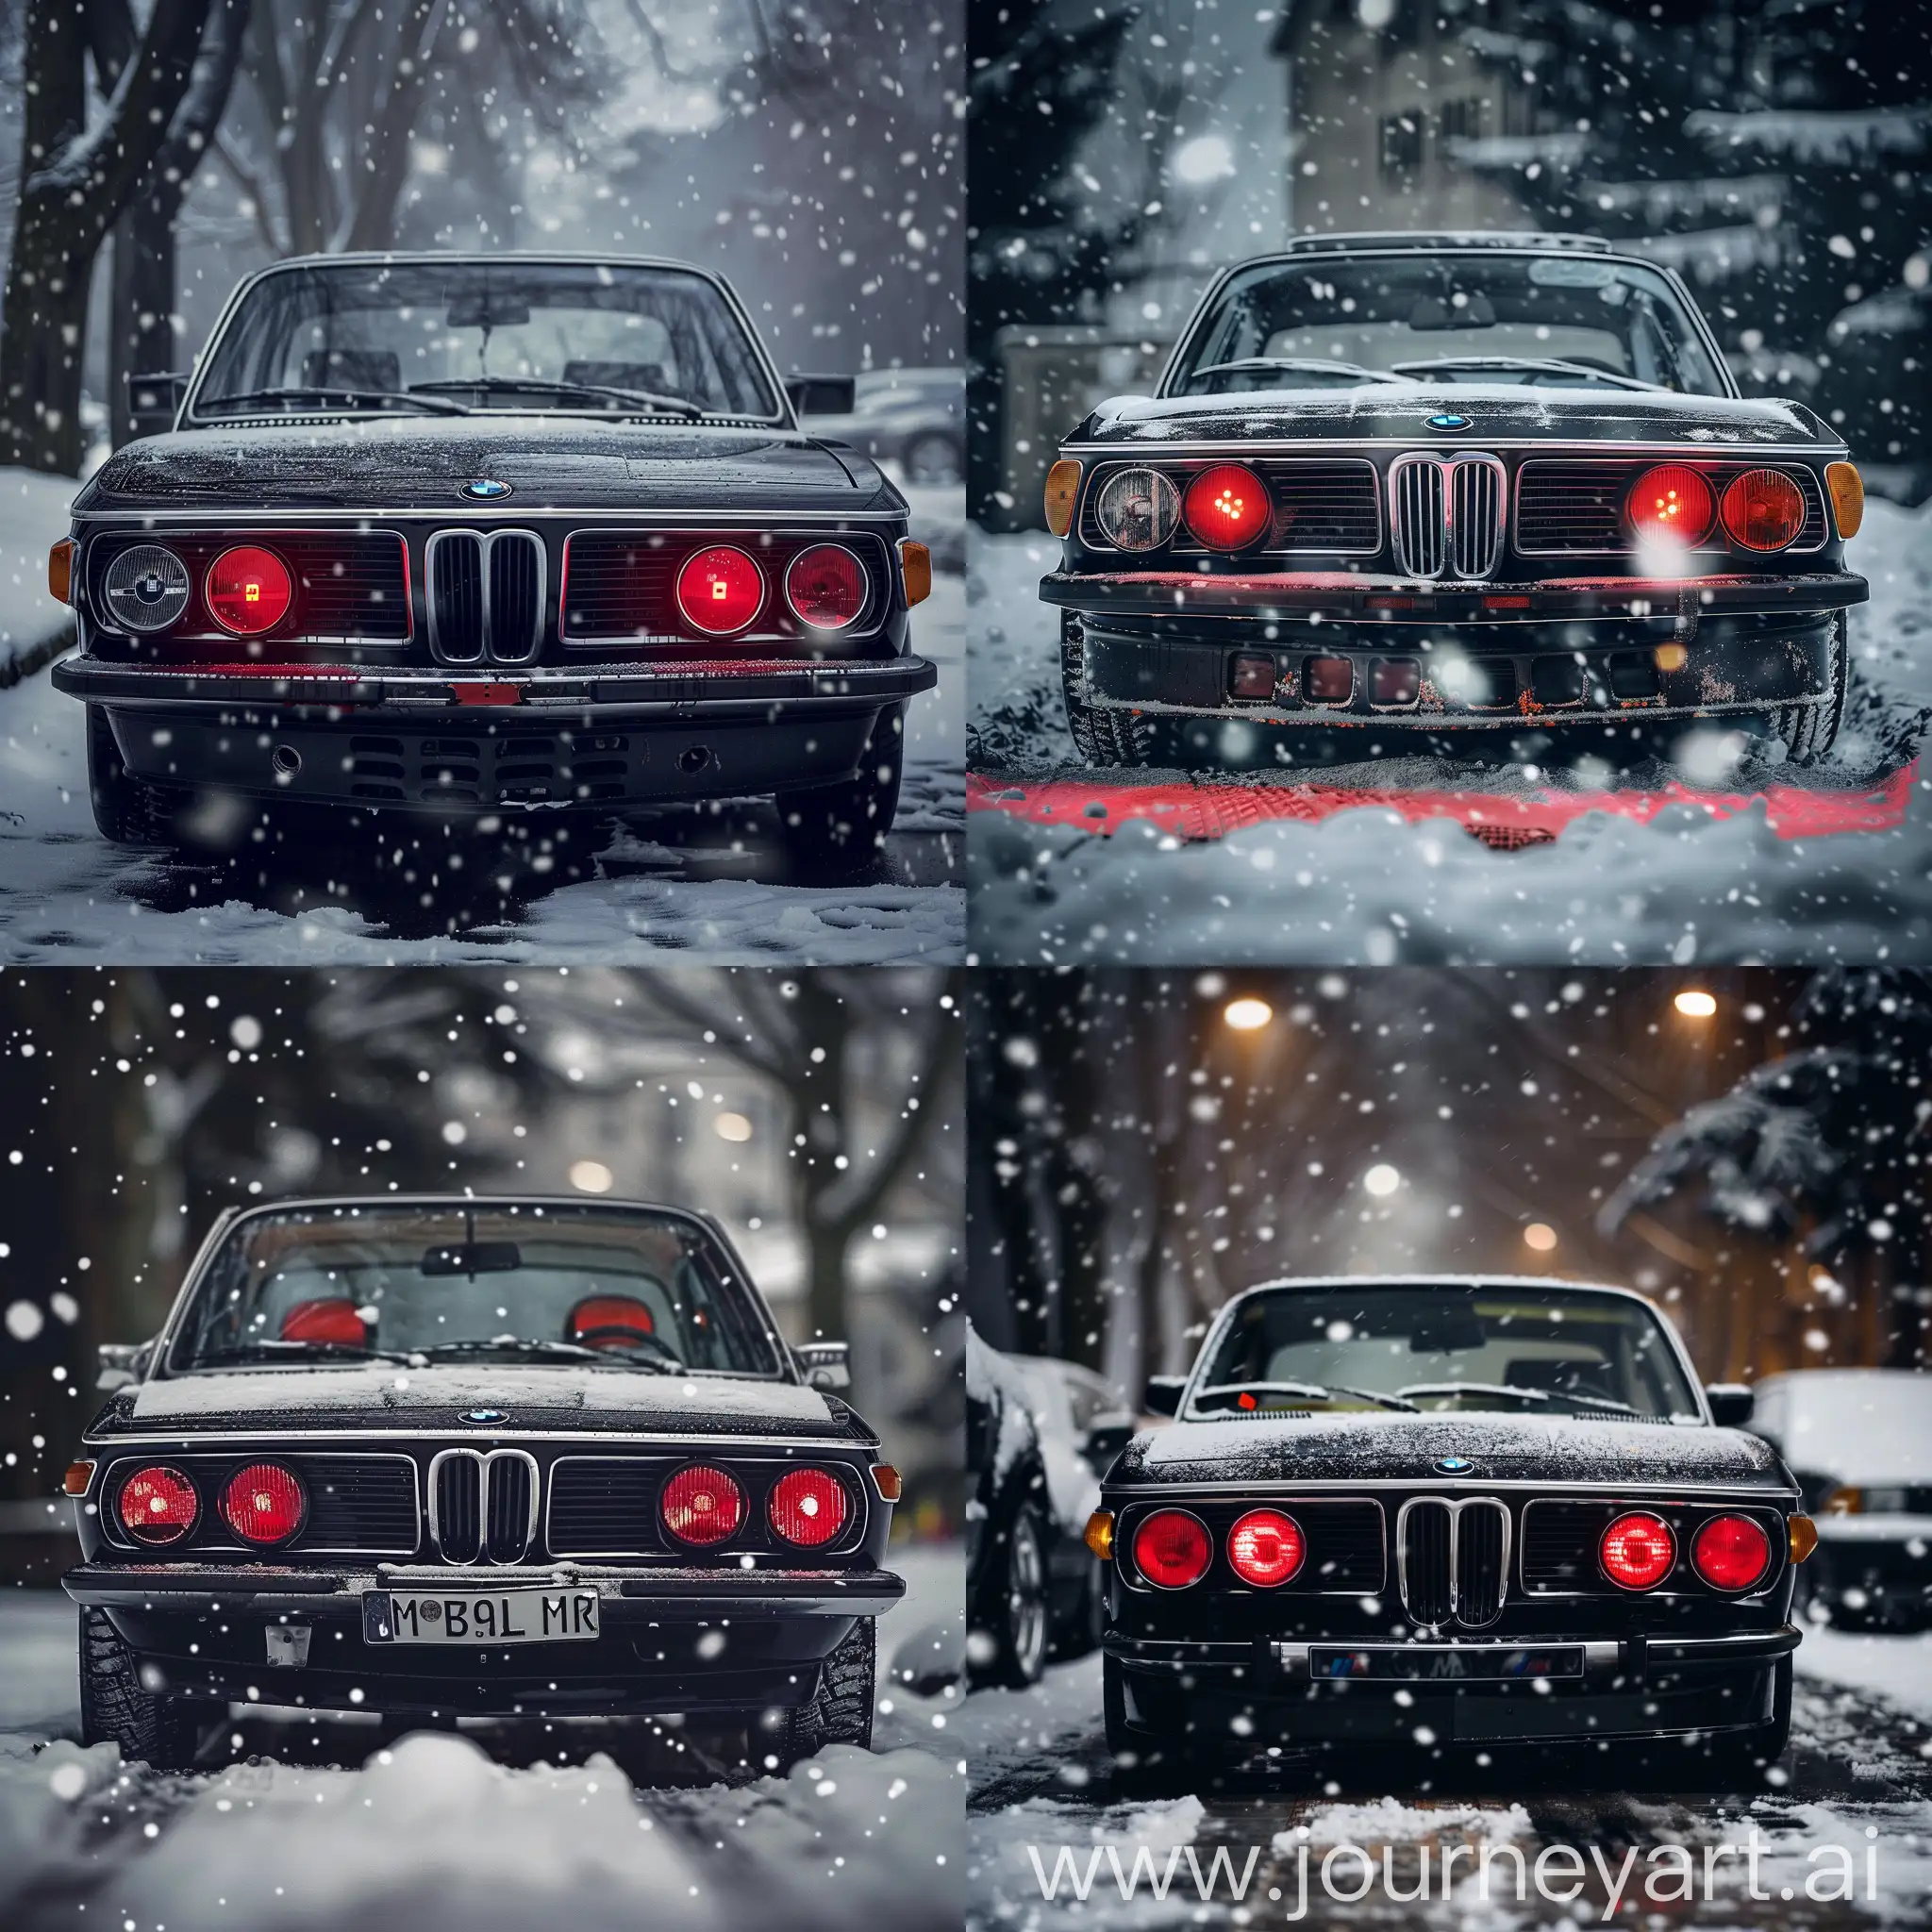 Vintage-BMW-with-Red-Headlights-in-Snowy-Setting